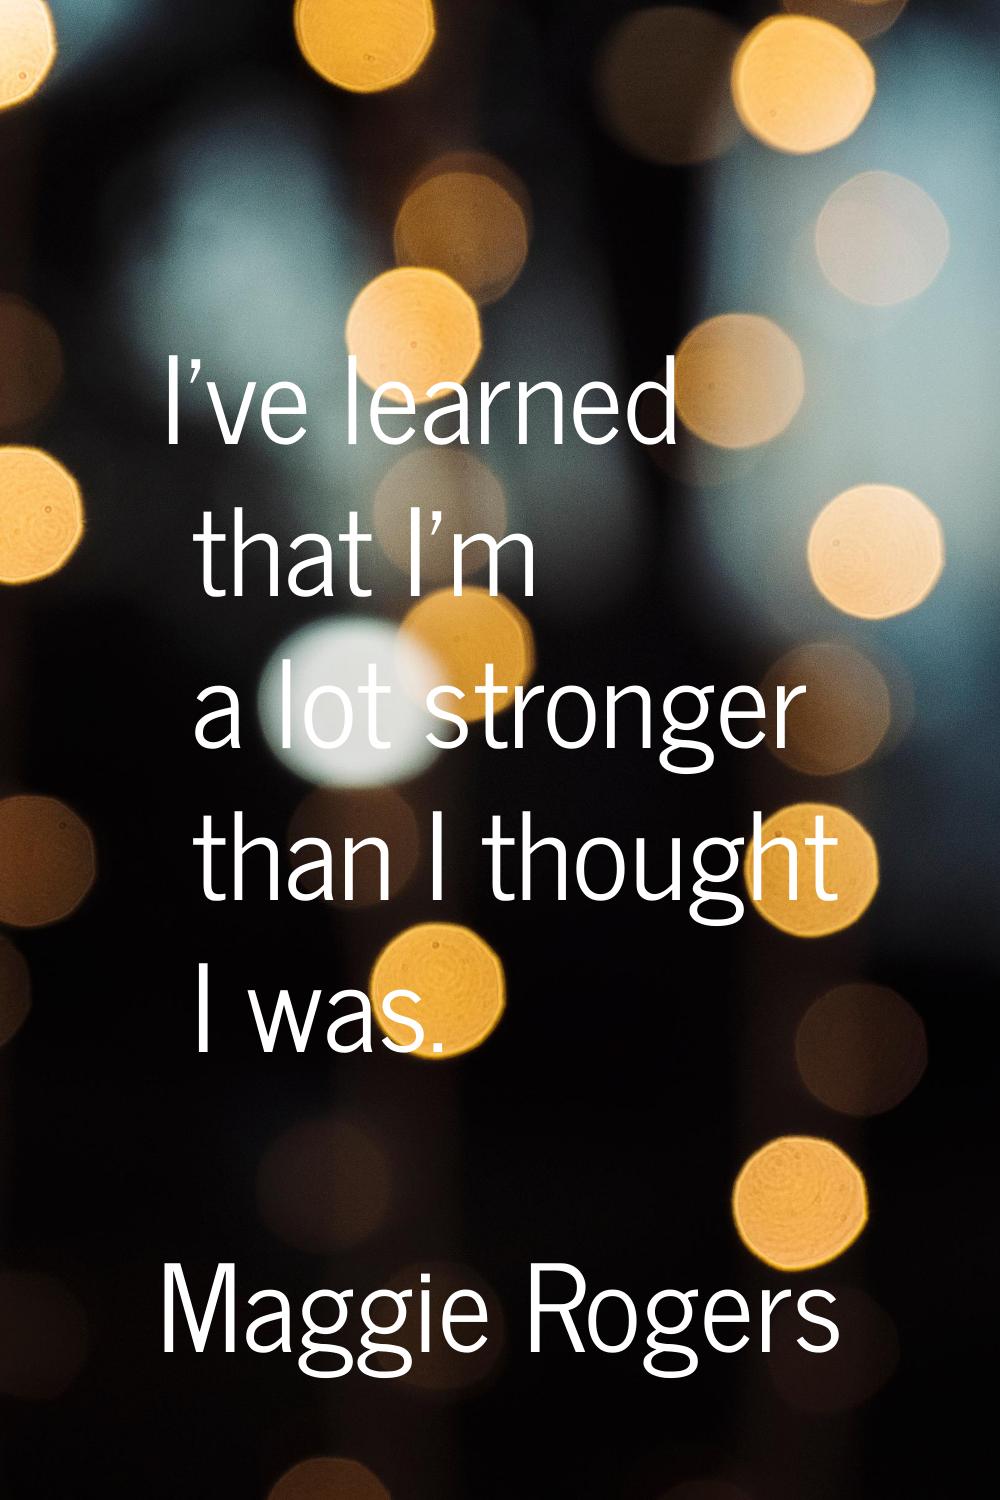 I've learned that I'm a lot stronger than I thought I was.